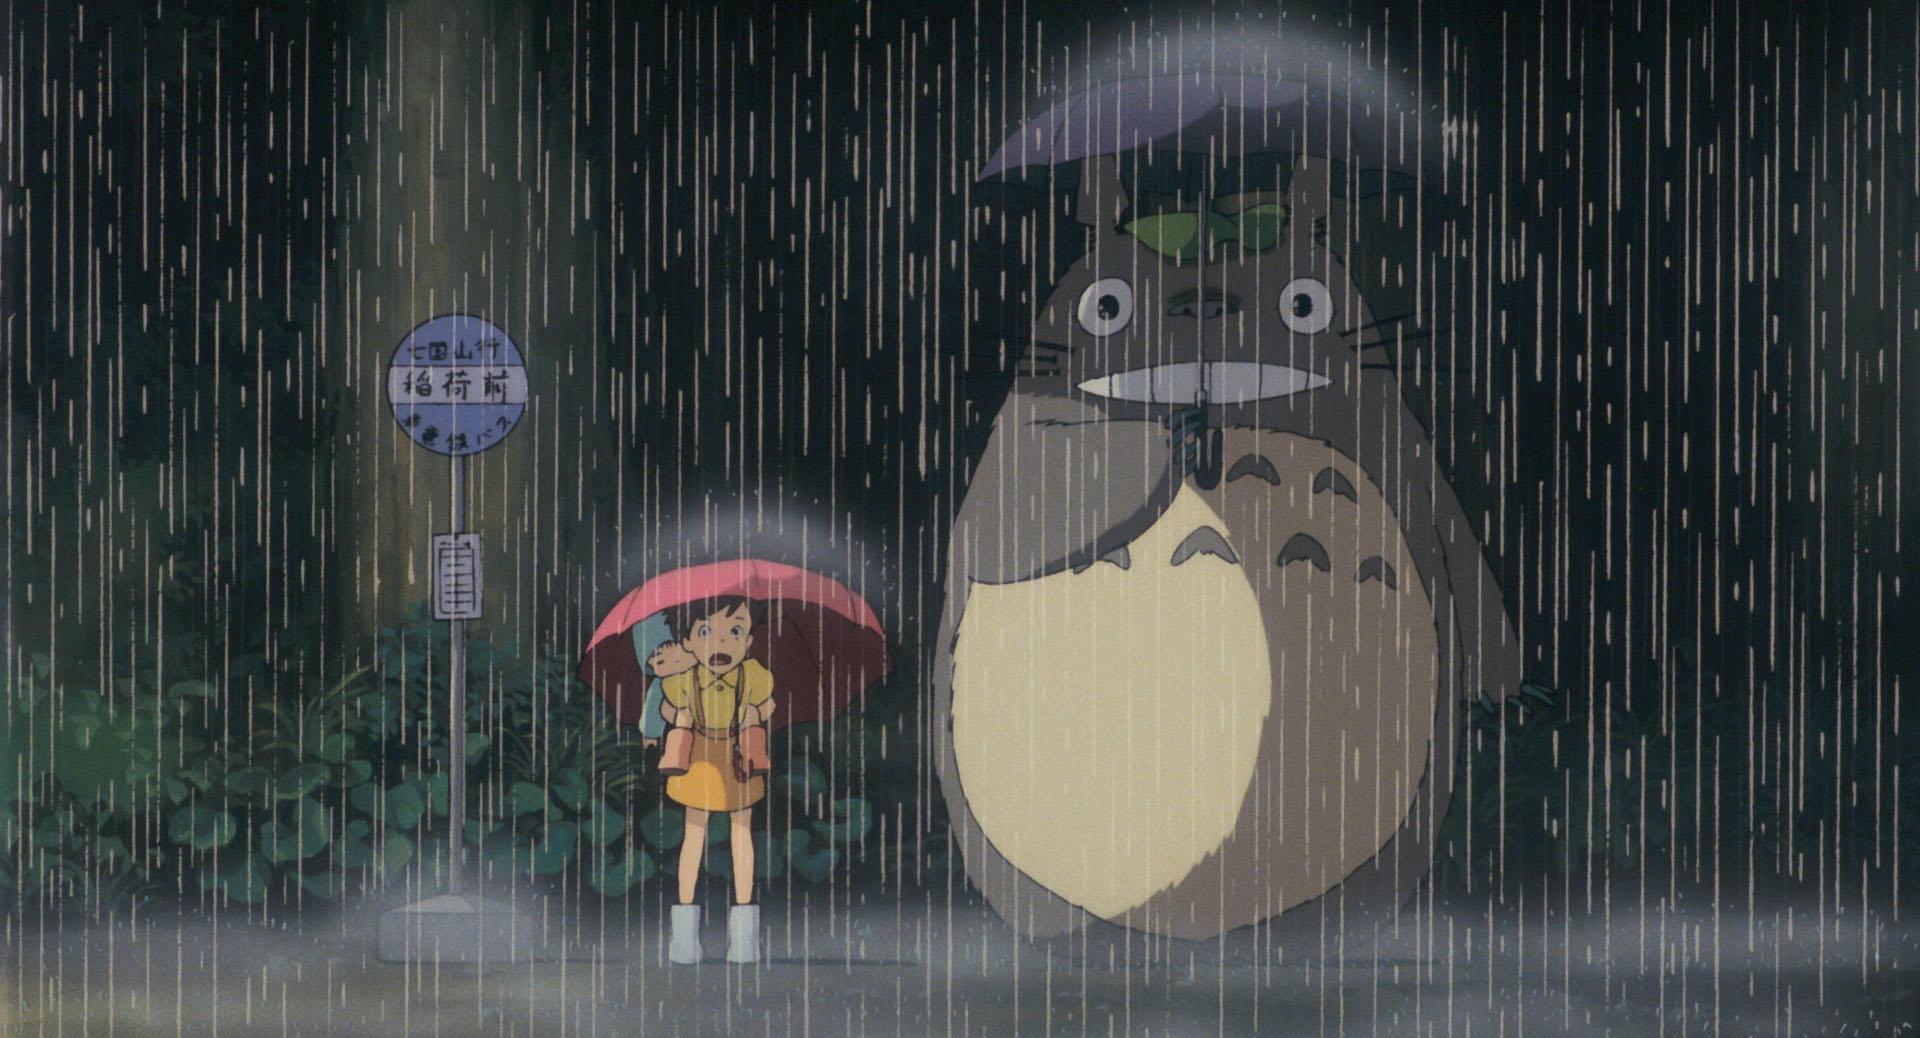 Studio Ghibli releases 300 images from some of its most iconic films